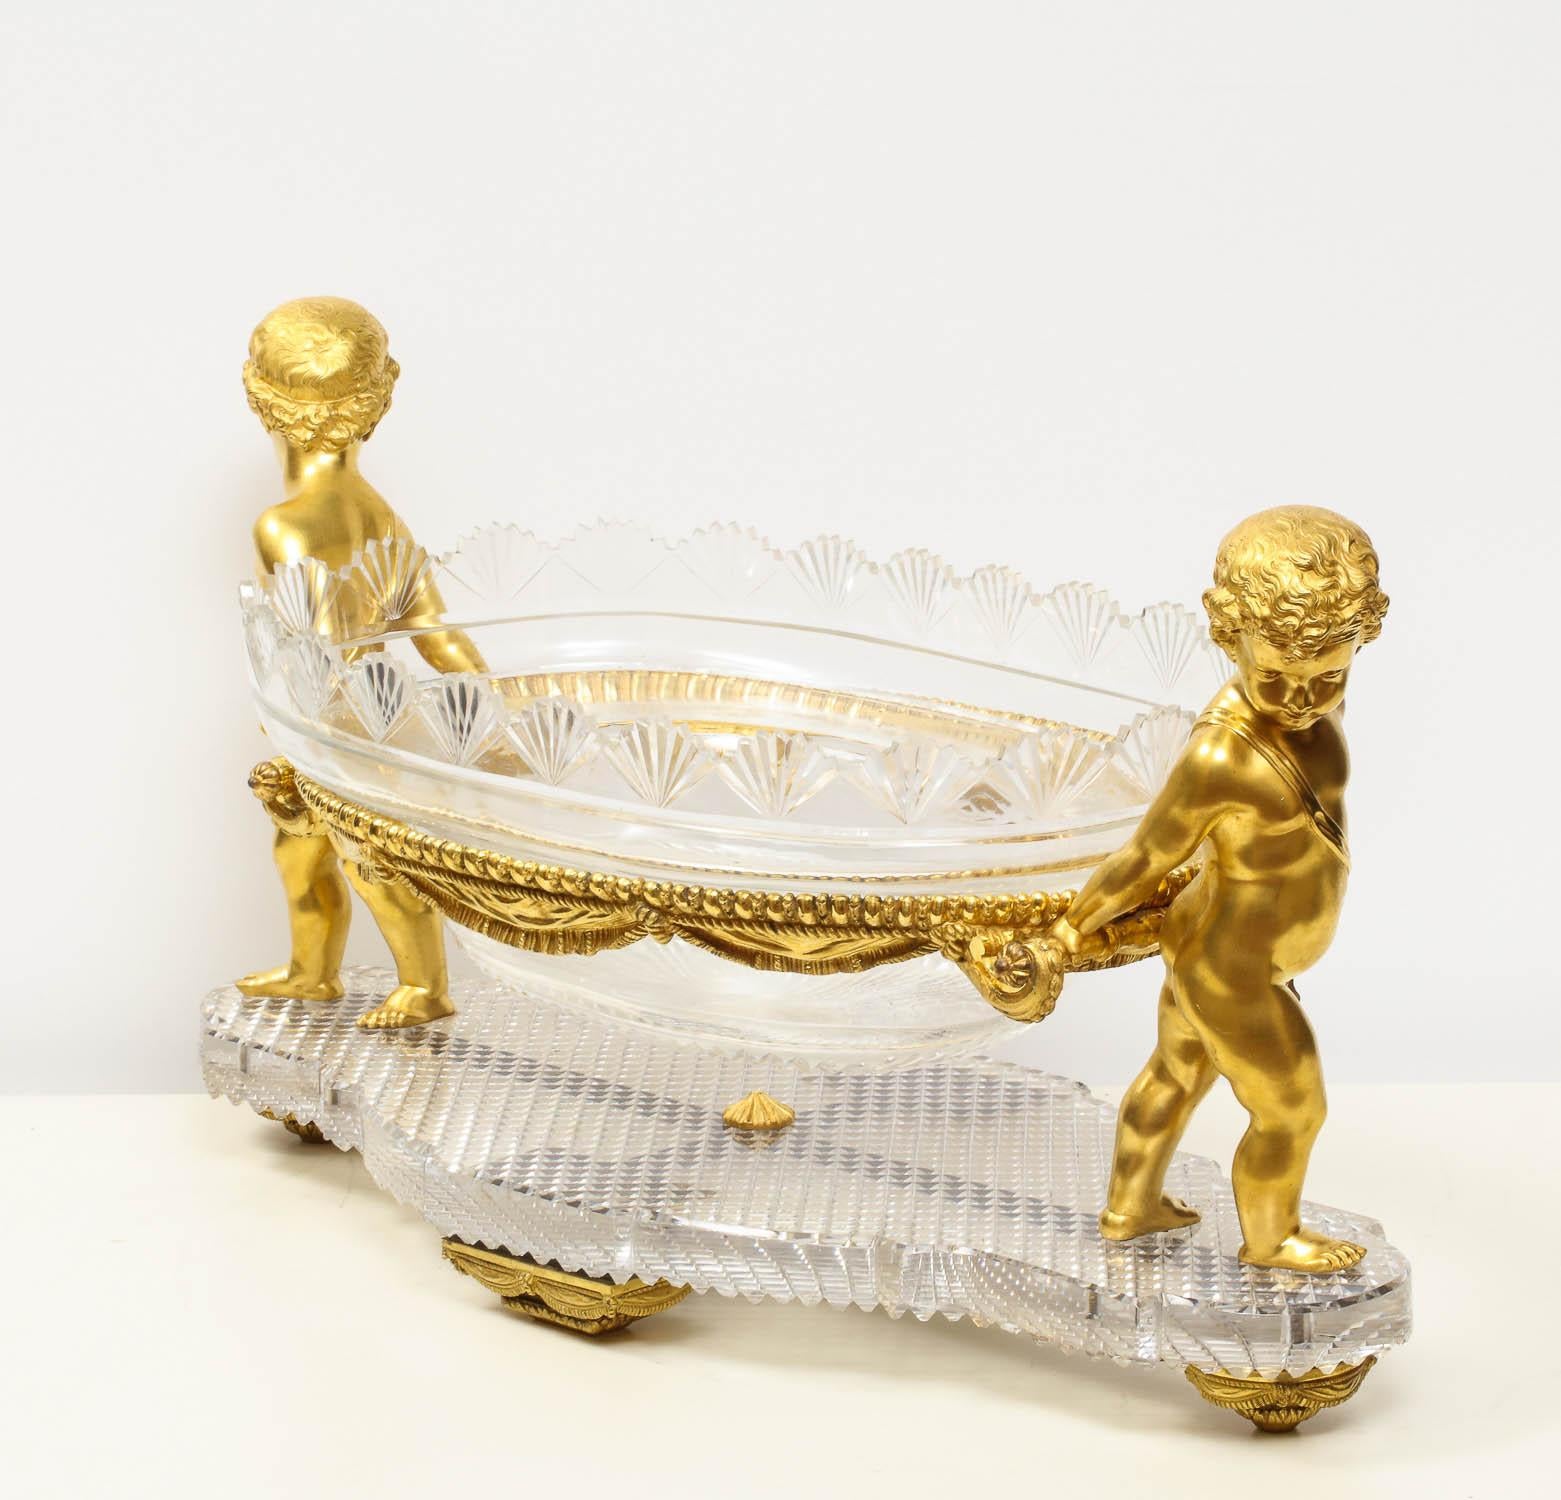 Napoleon III French Ormolu and Cut-Glass Centerpiece by Baccarat Paris, circa 1870